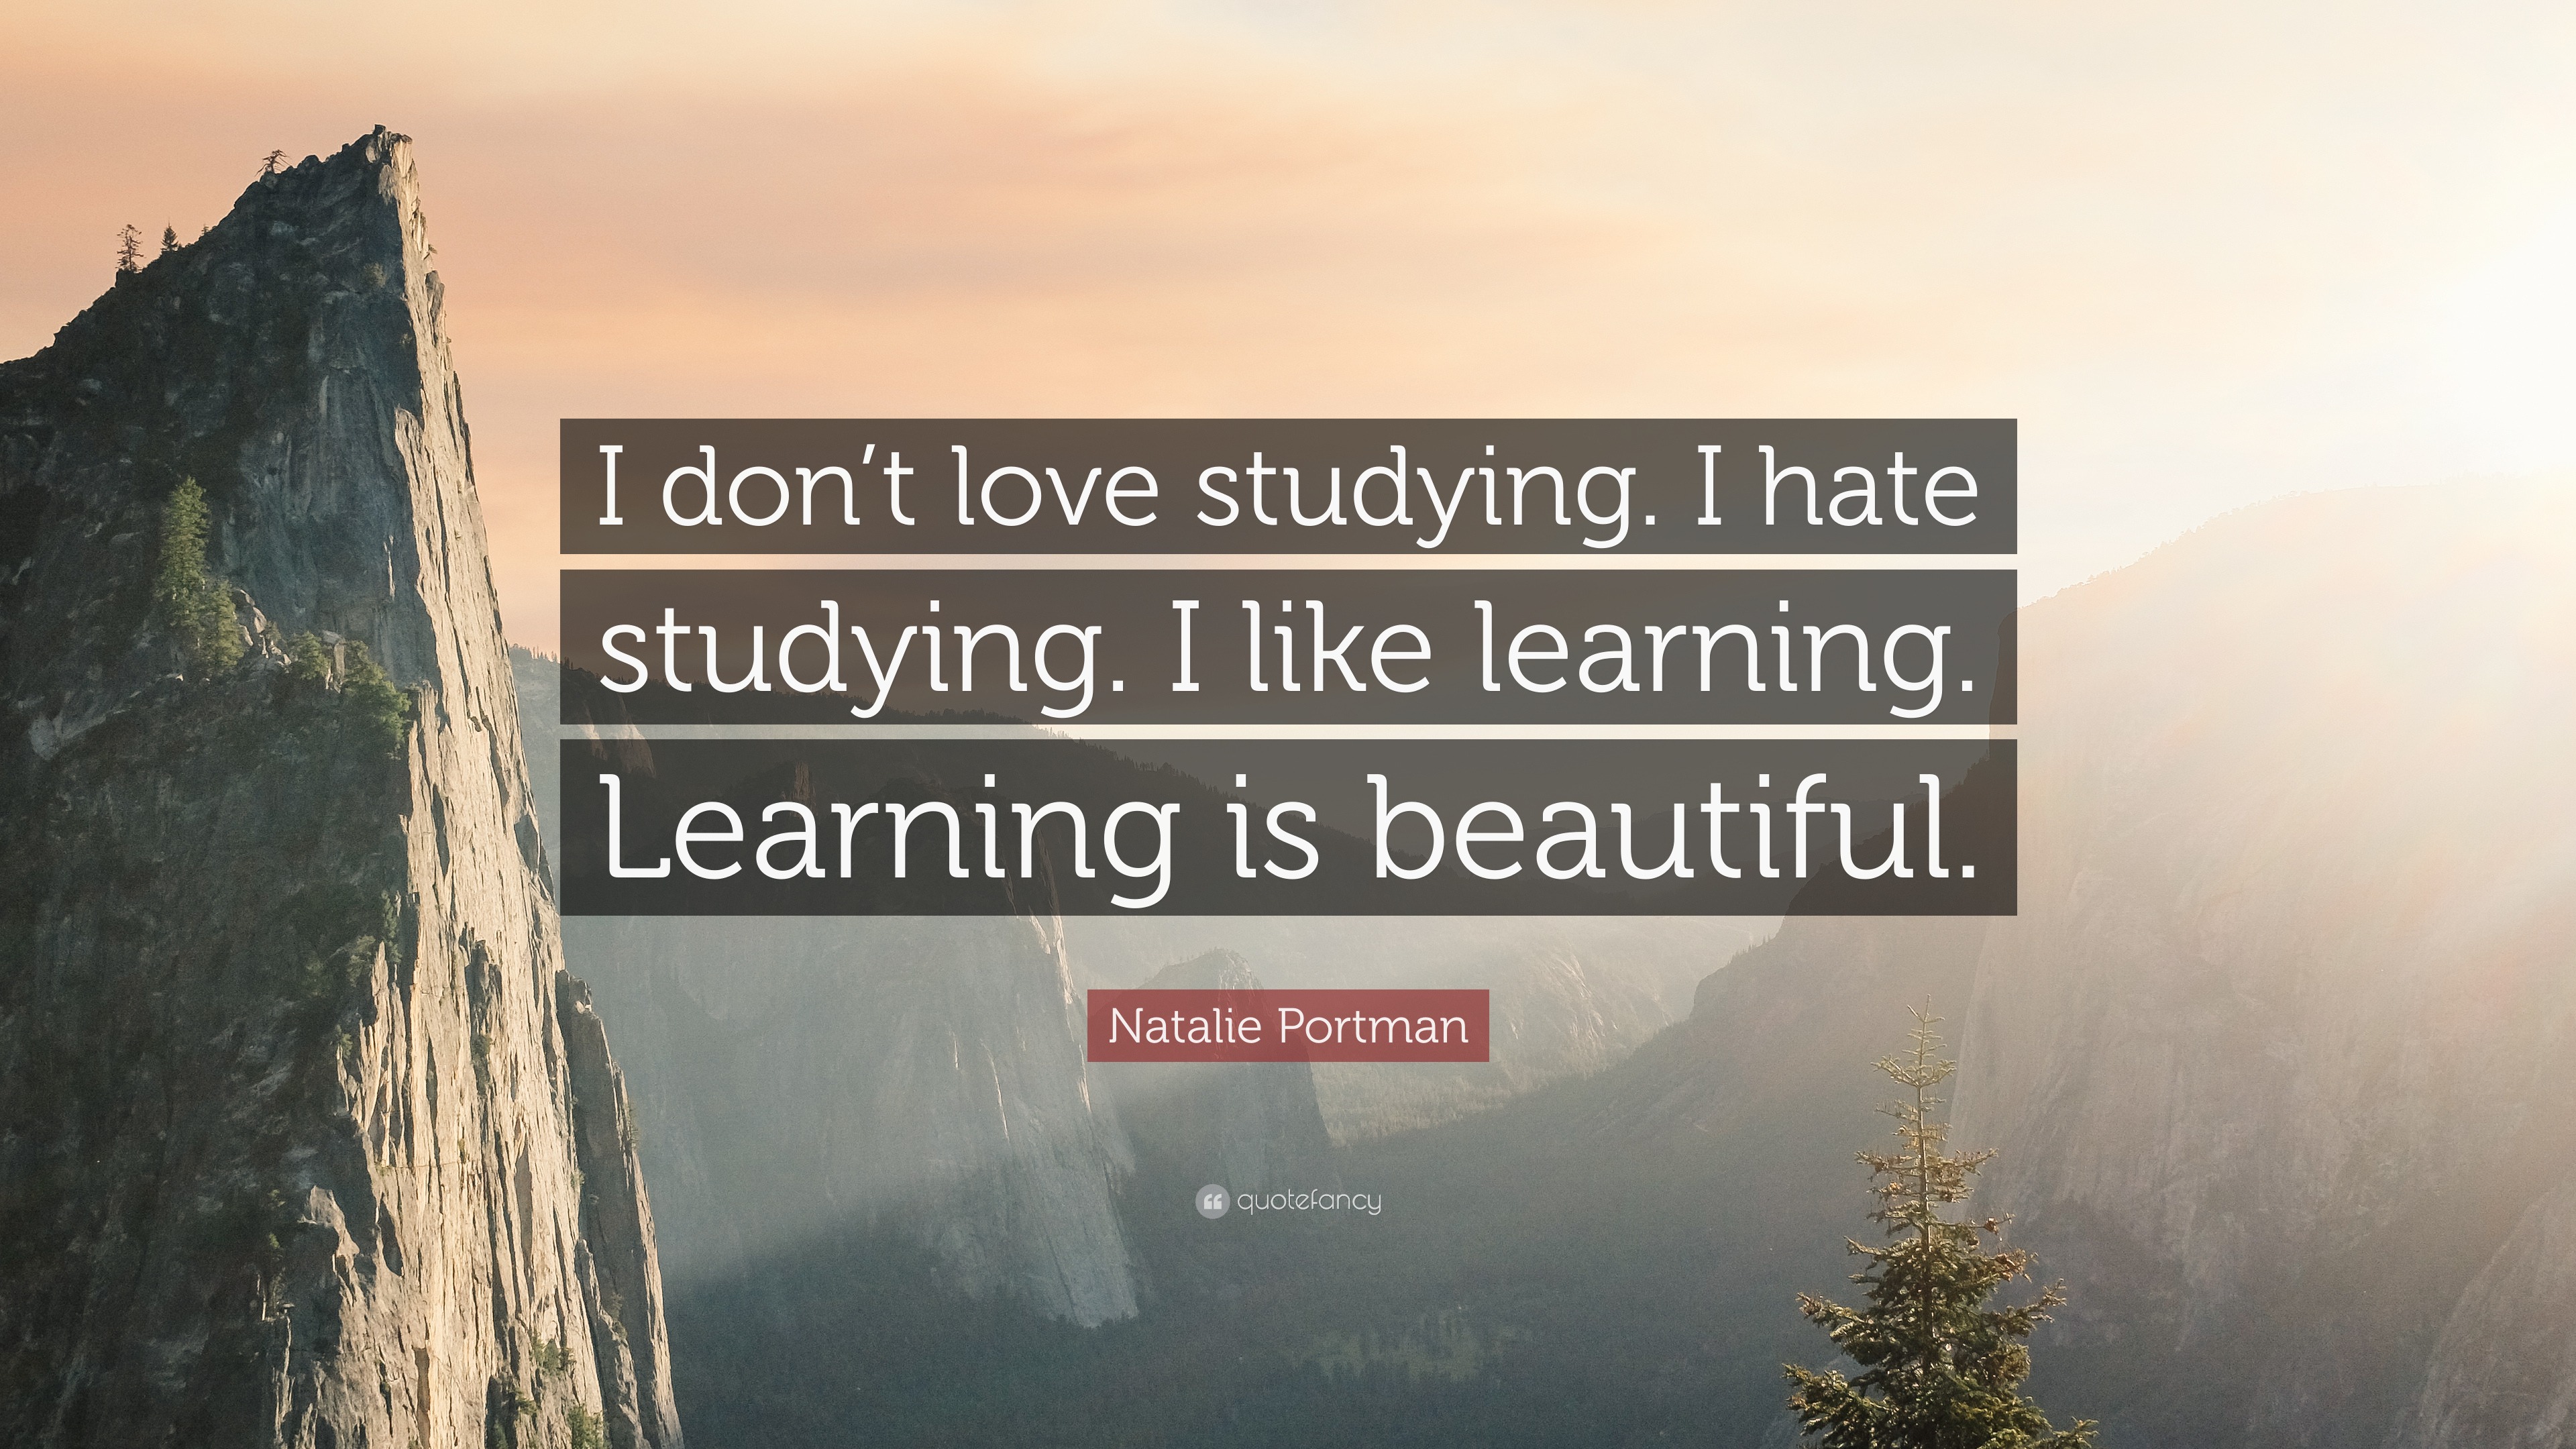 Natalie Portman Quote: "I don't love studying. I hate studying. I like learning. Learning is ...